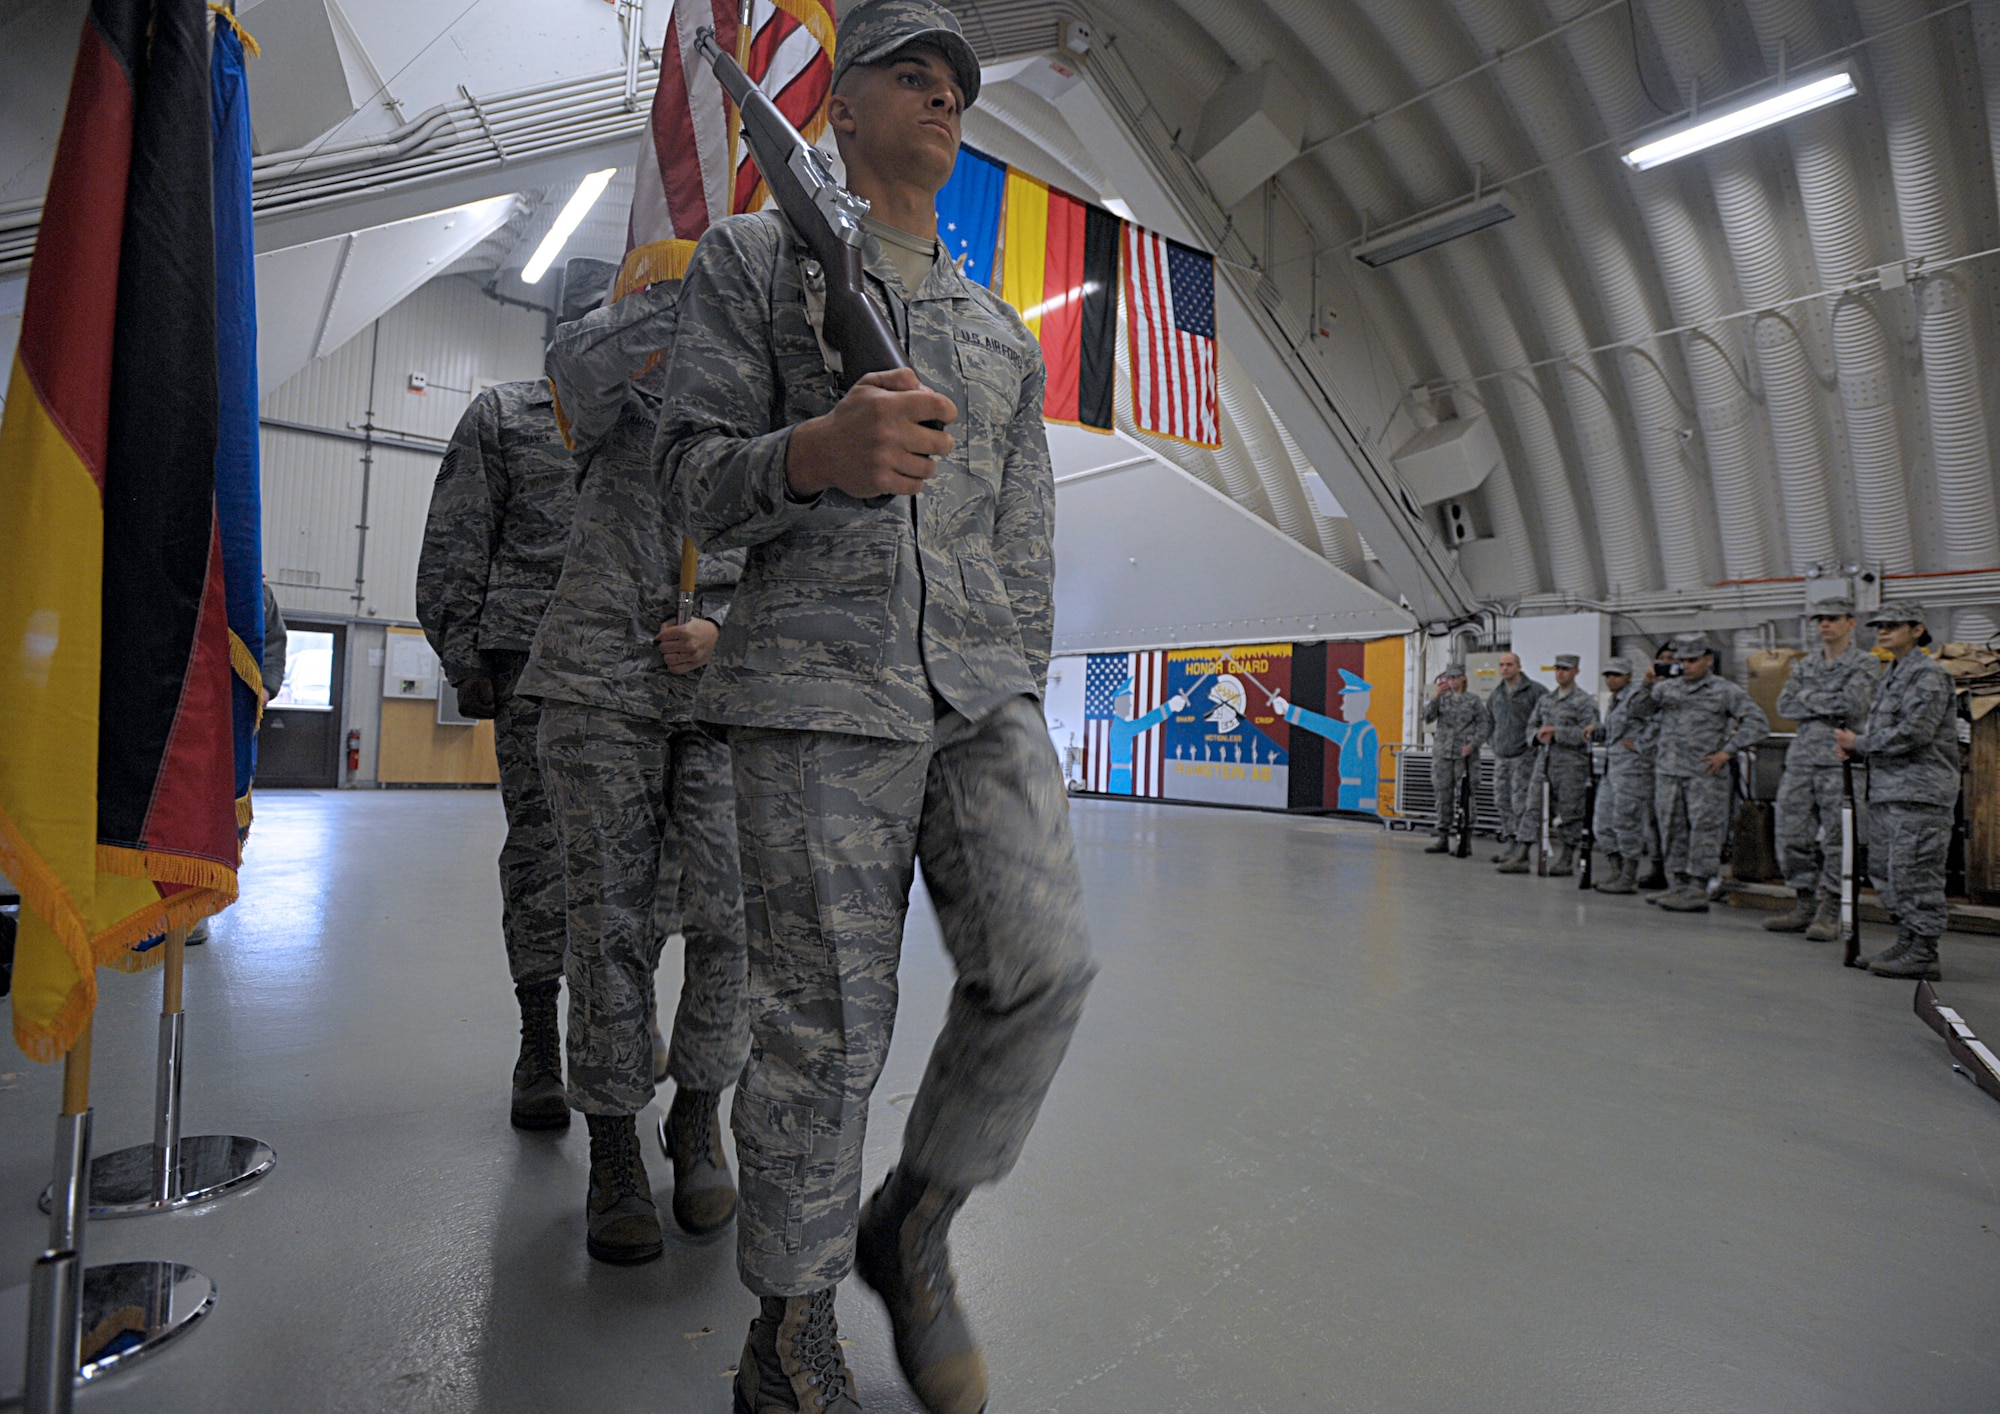 U.S. Air Force Honor Guard members demonstrate color guard movements to members of the Ramstein Honor Guard March 15, 2016, at Ramstein Air Base, Germany. Ramstein Honor Guard members got the opportunity to learn uniform preparation and color guard motions from U.S. Air Force Honor Guard members. (U.S. Air Force photo/Staff Sgt. Timothy Moore)